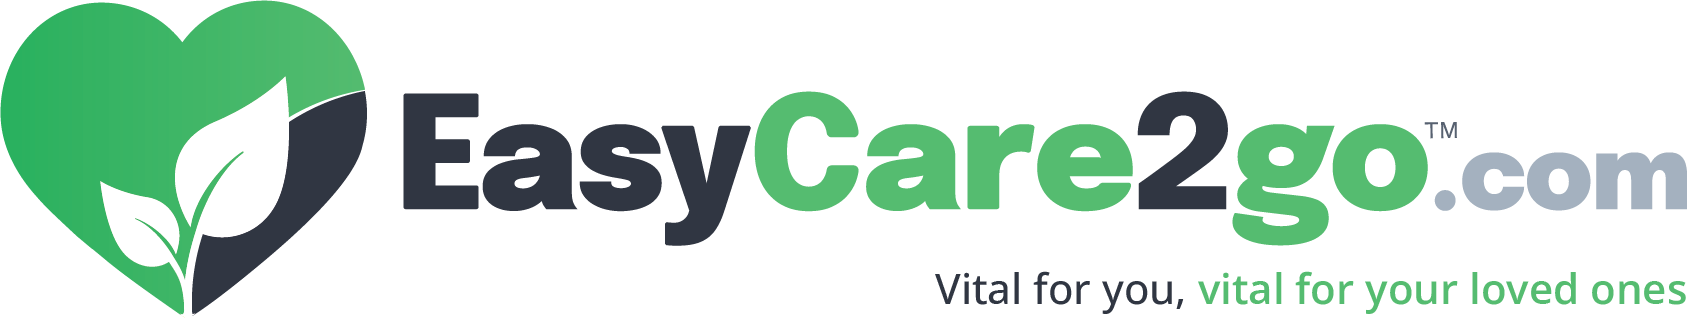 EasyCare2Go™ – Your health is our priority